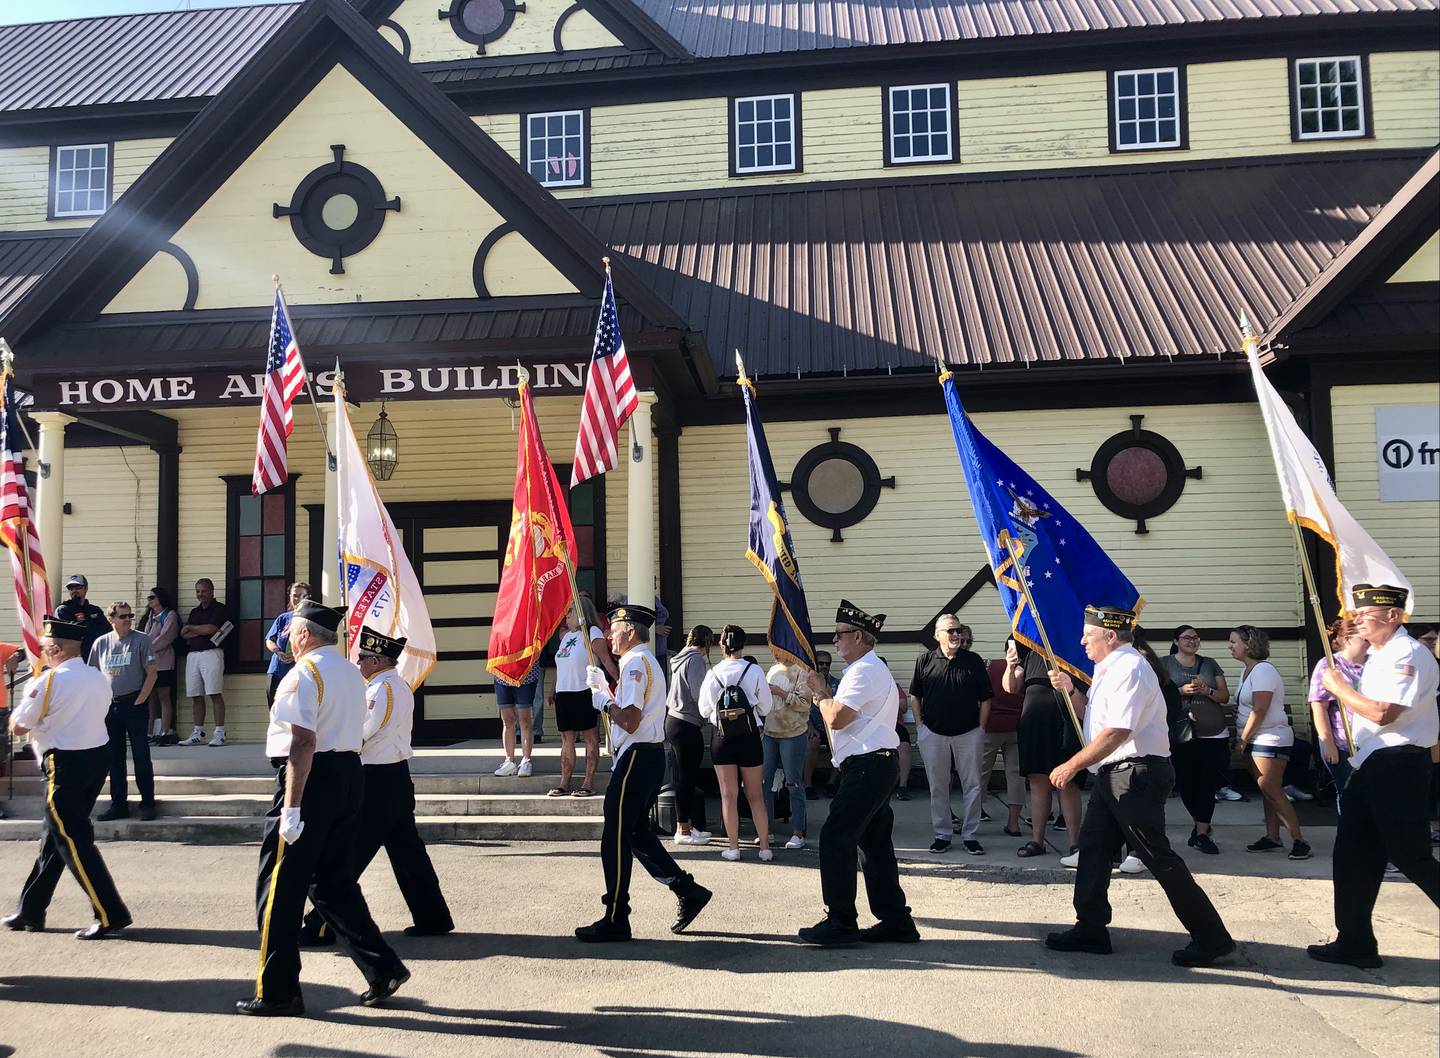 The opening ceremony at the Sandwich Fair featured the Sandwich High School marching band performing as the Sandwich and Plano American Legions and Sandwich VFW carried out the flag ceremony at 9 a.m. on Wednesday Sept. 7 2022.